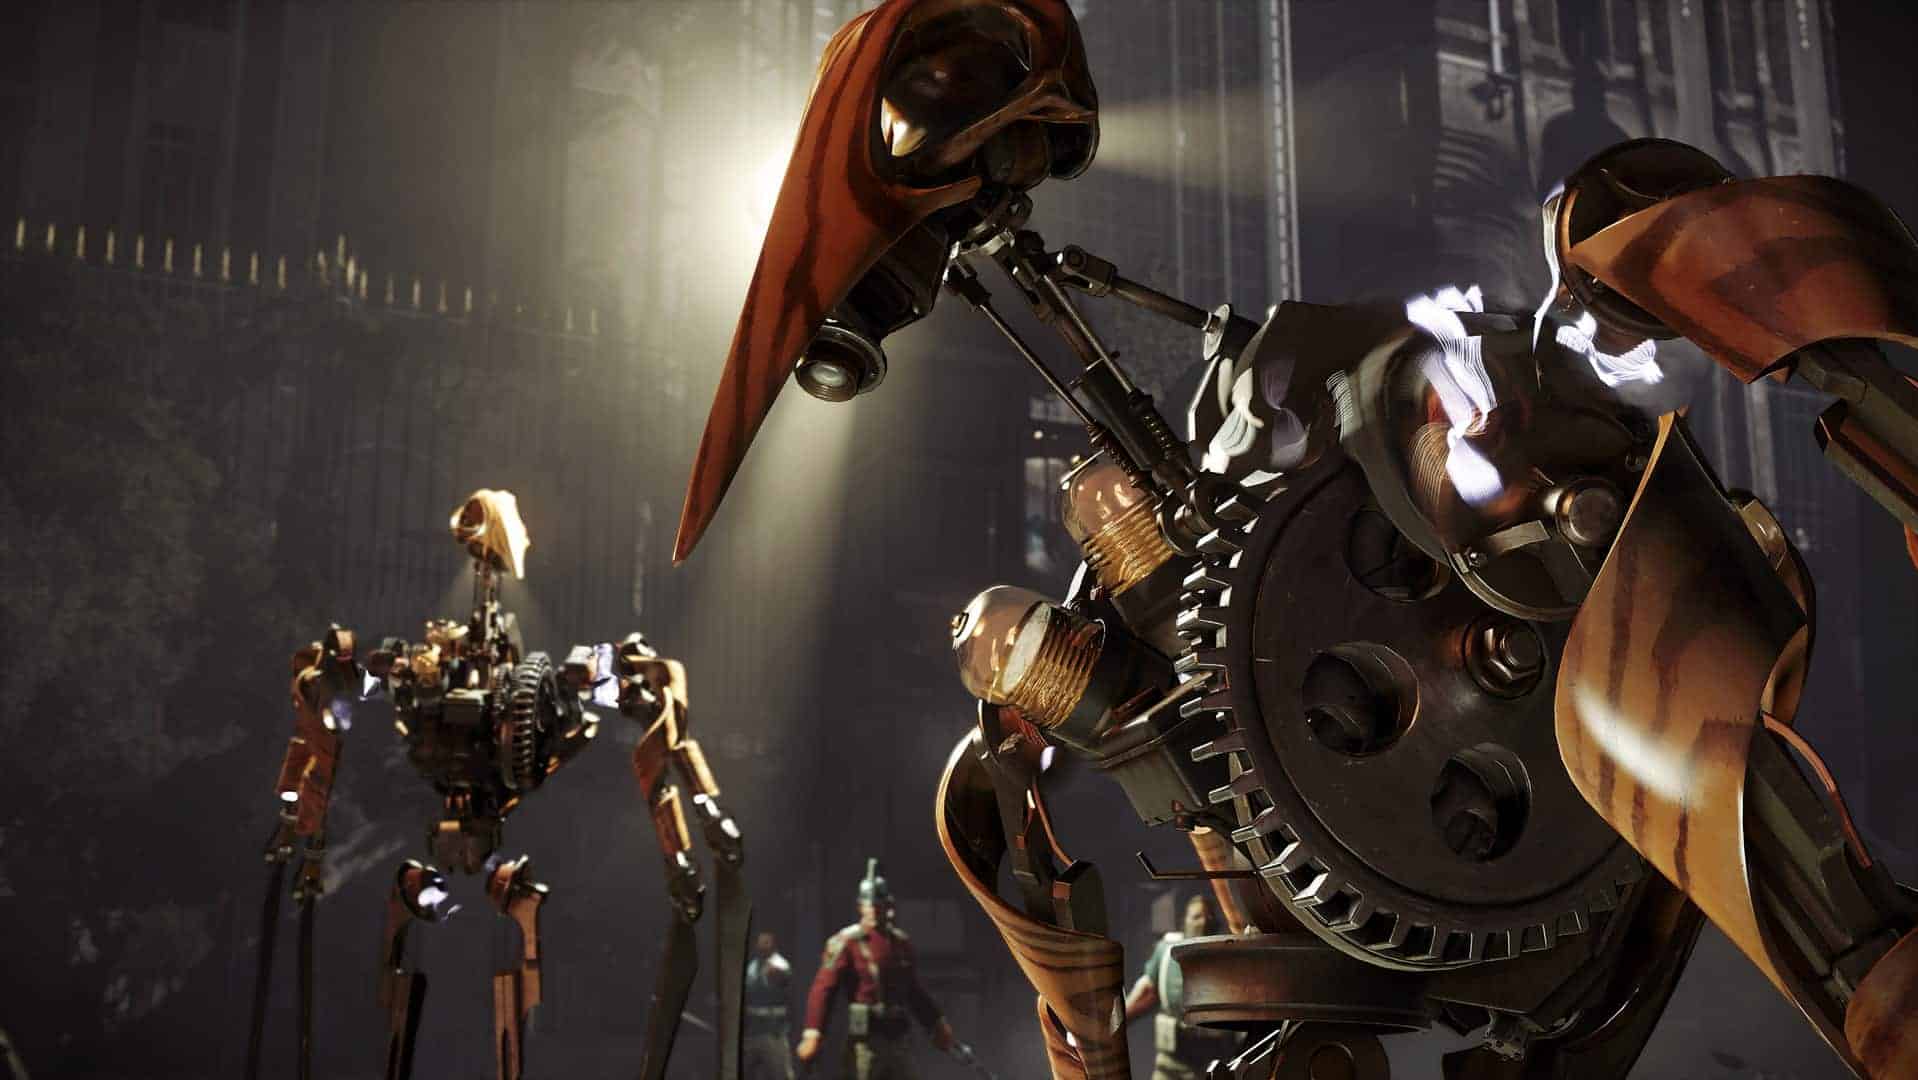 download dishonored pc for free